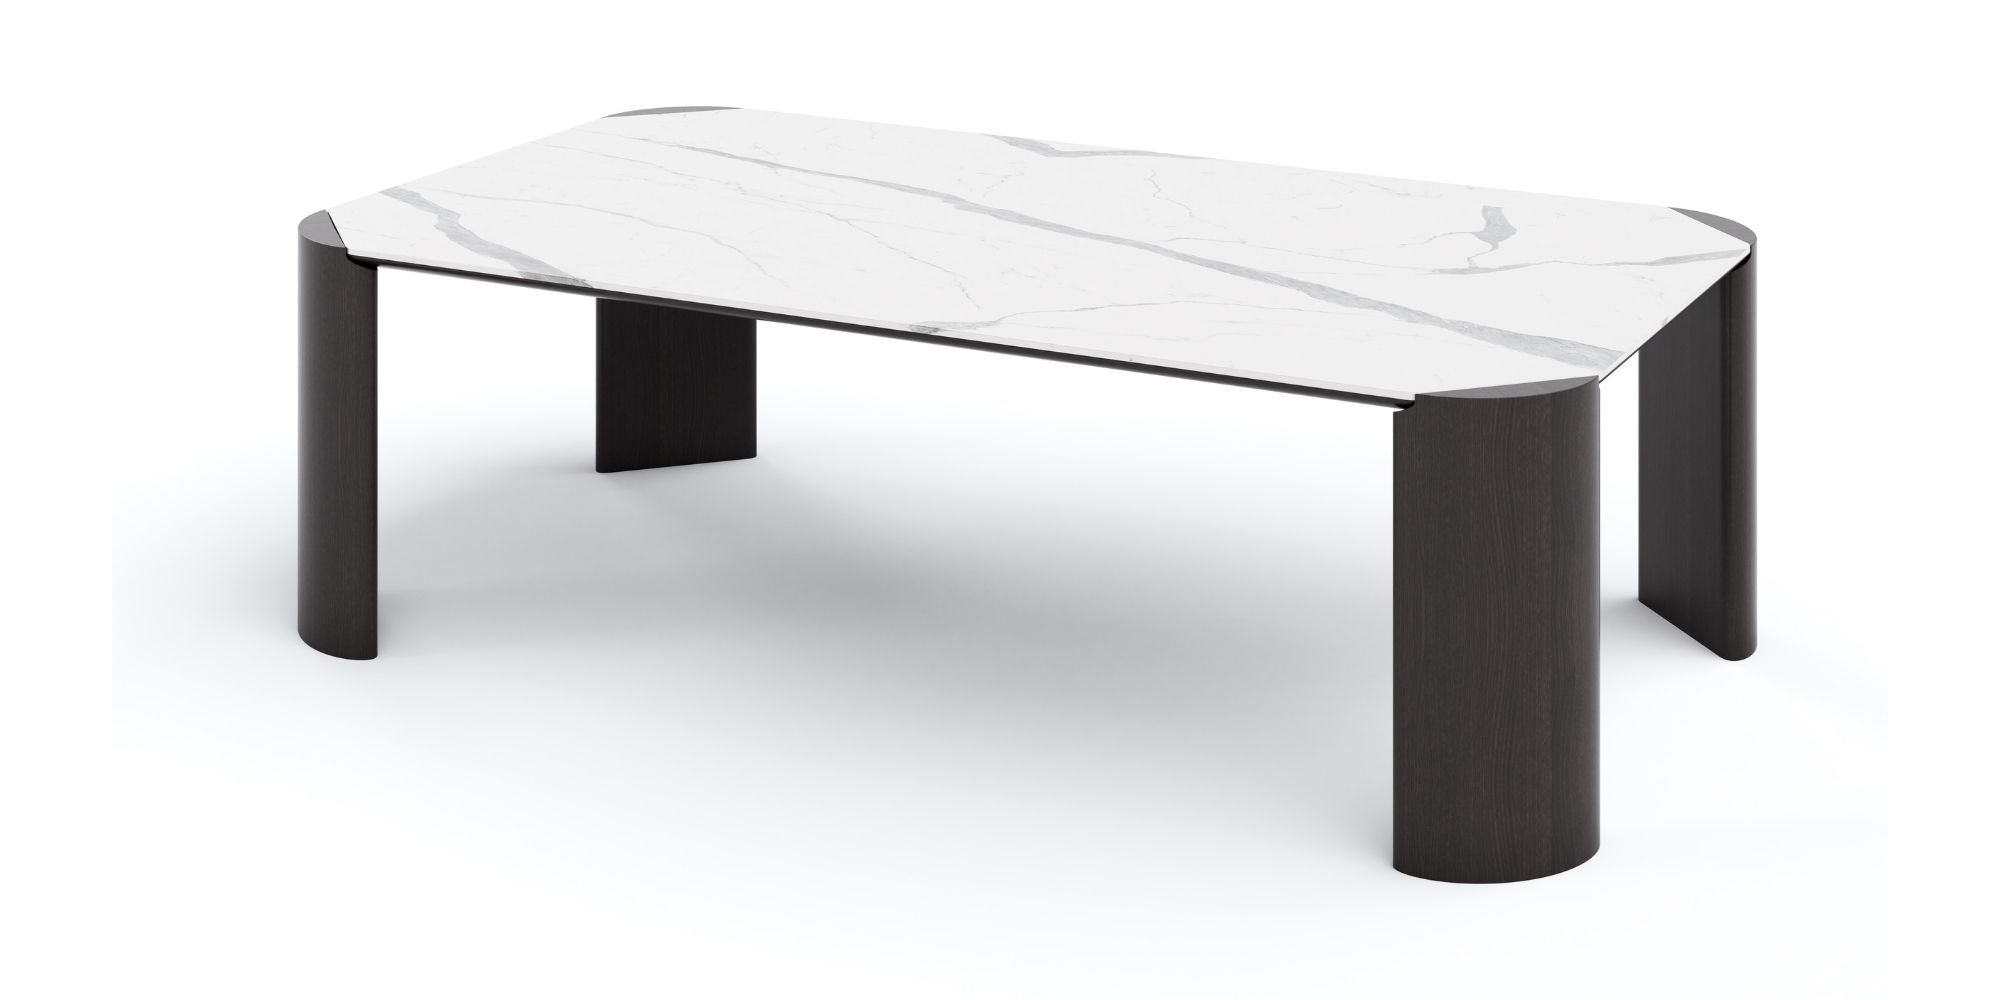 Perseus Porcelain Rectangular Dining Table in Outdoor Tables Dining Tables for Asteri collection